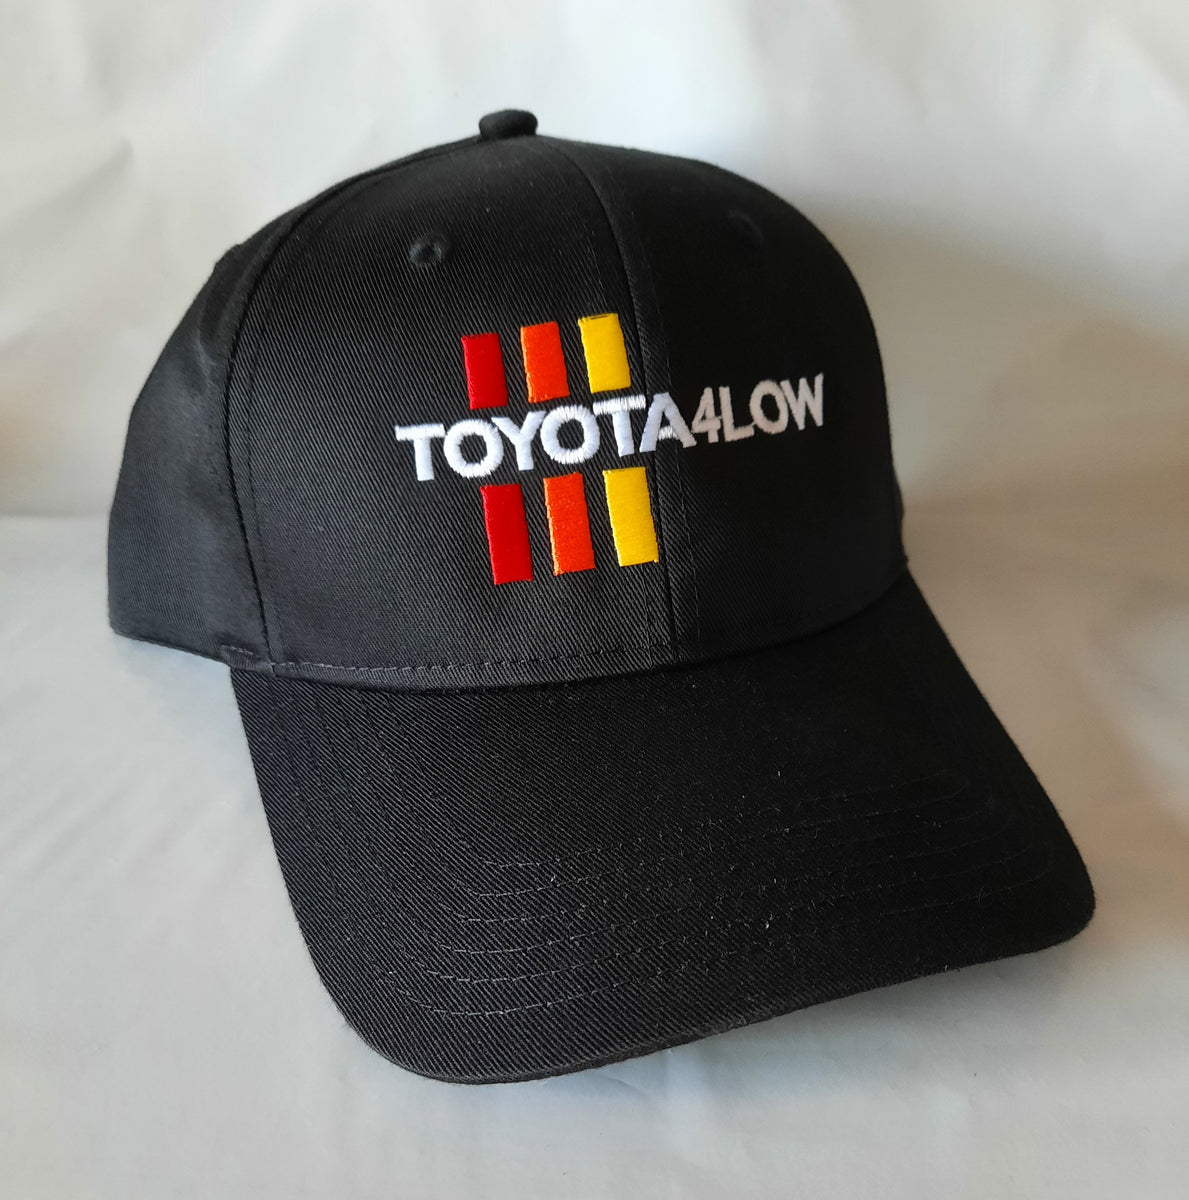 Toyota4Low Solid, Structured Hat